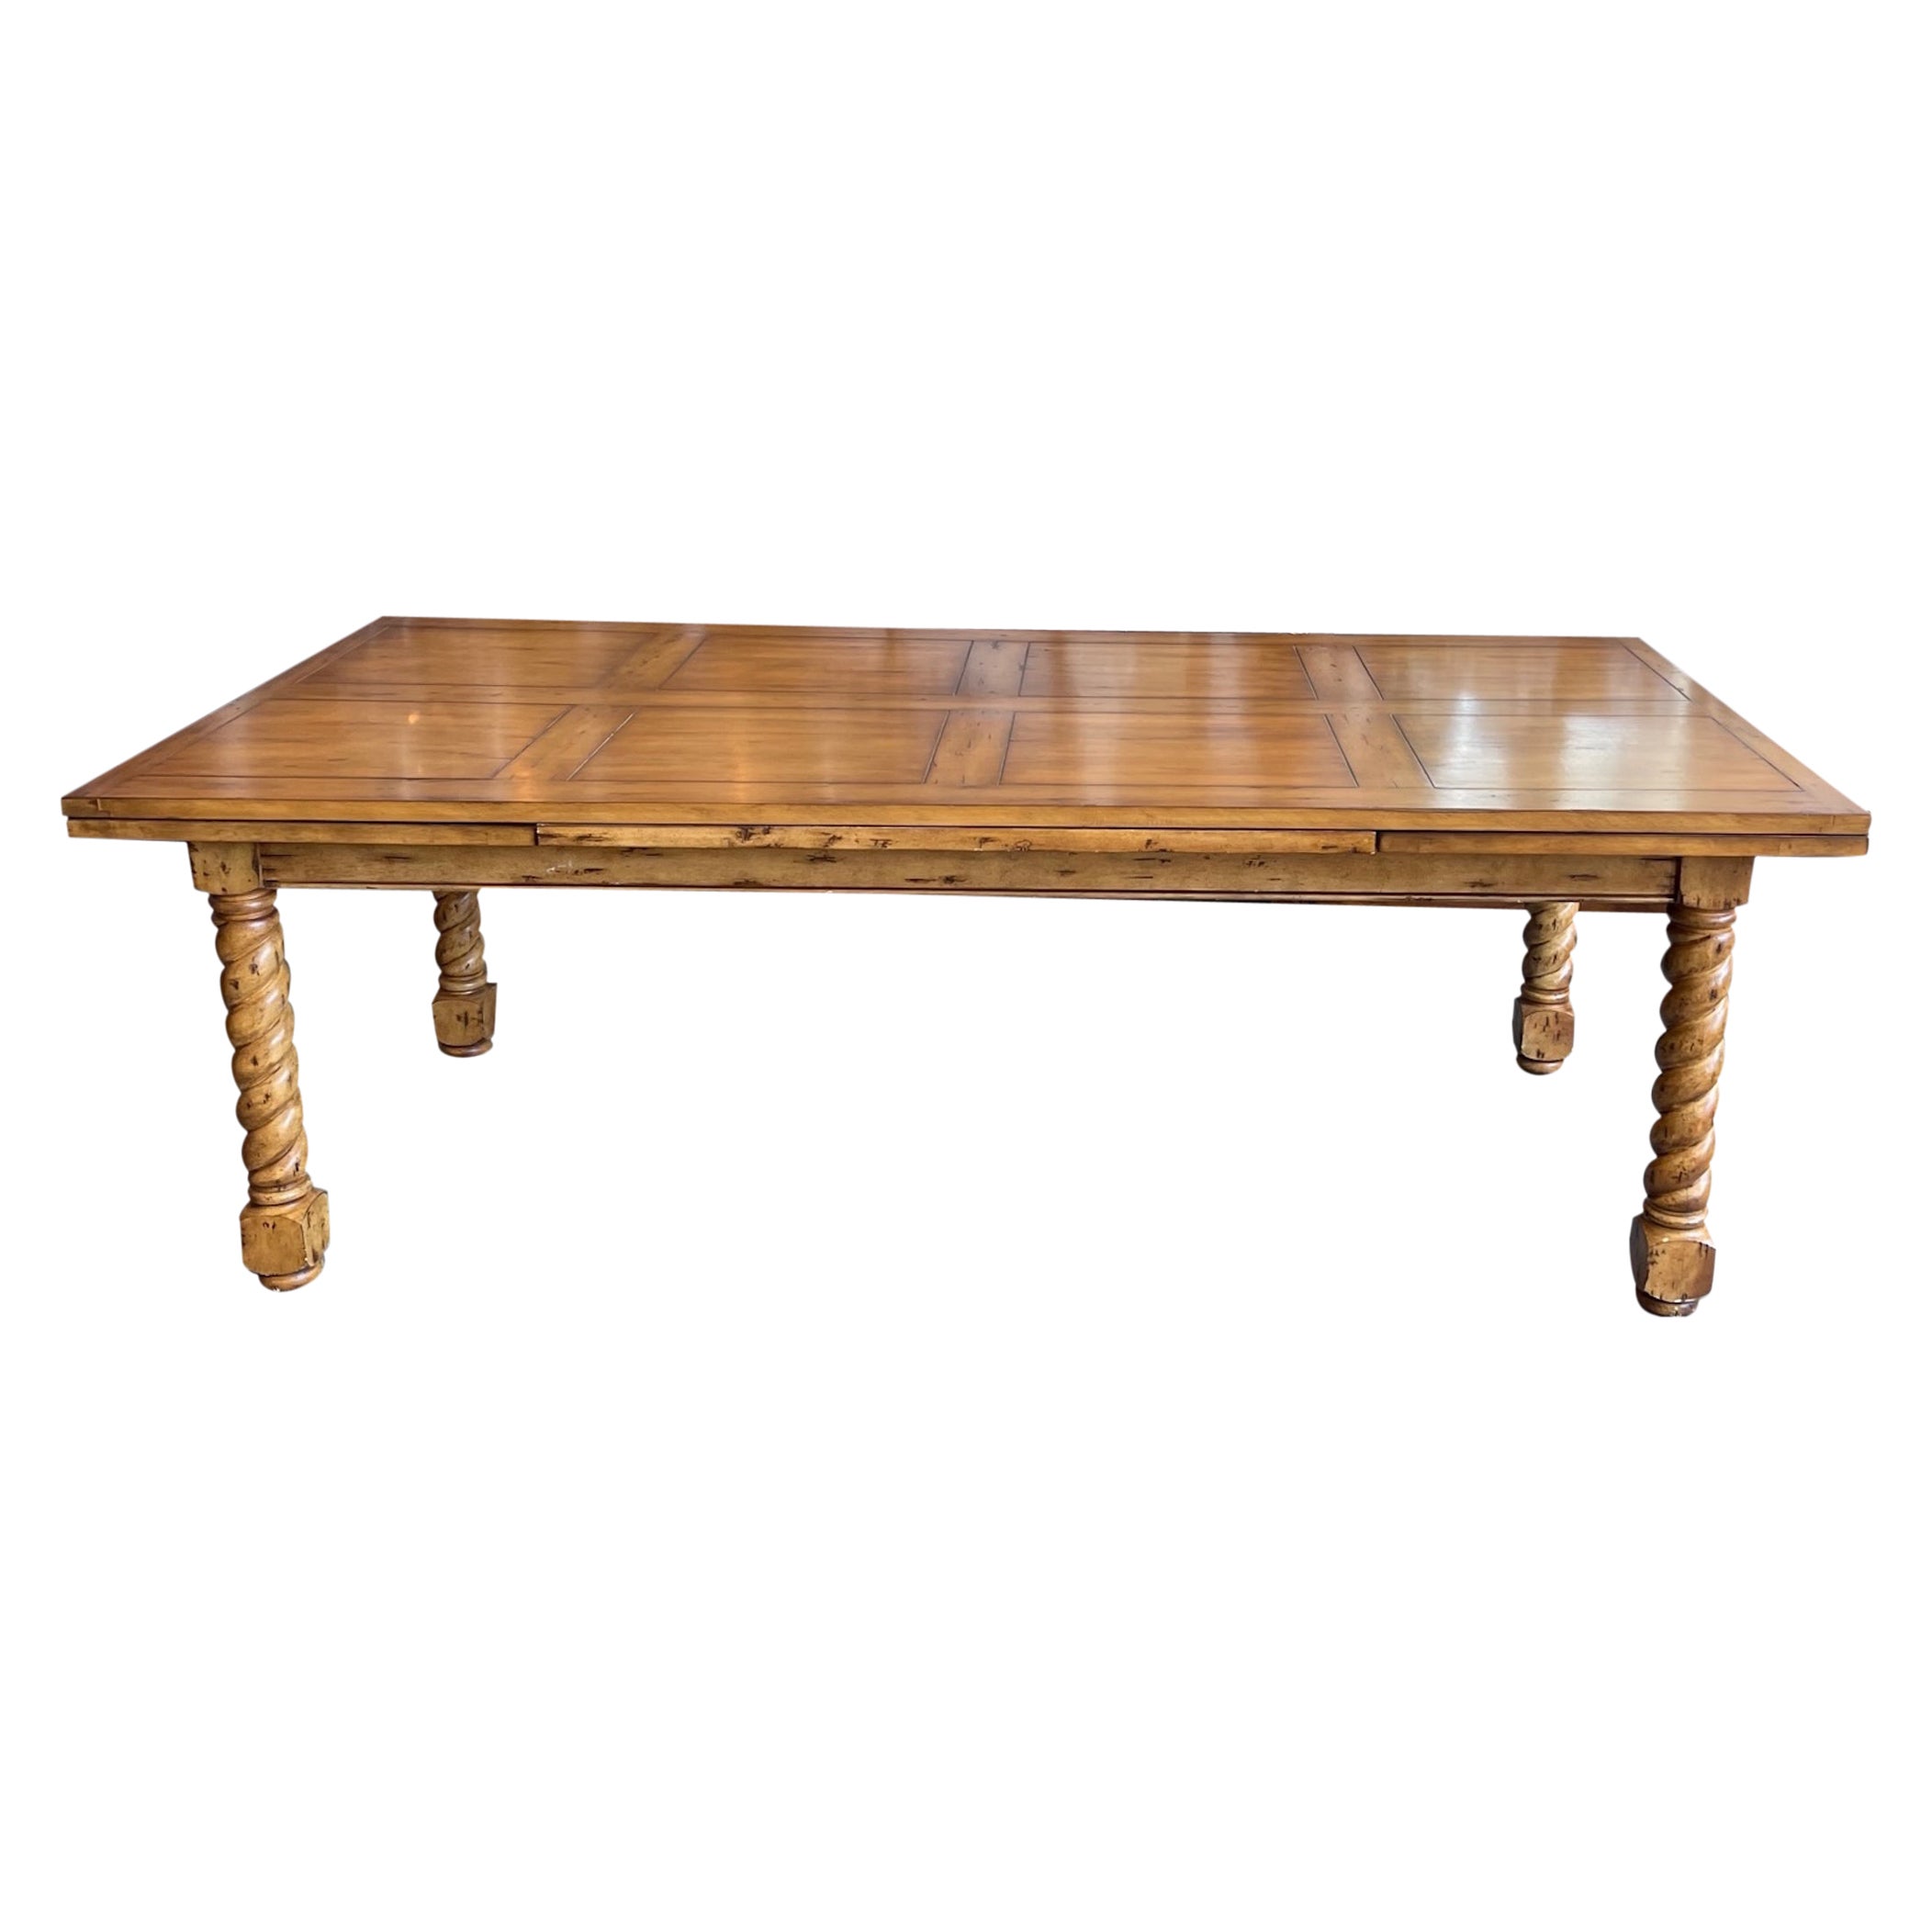 French 19th Century Stained Oak Dining Table with 2 Leaves Extensions